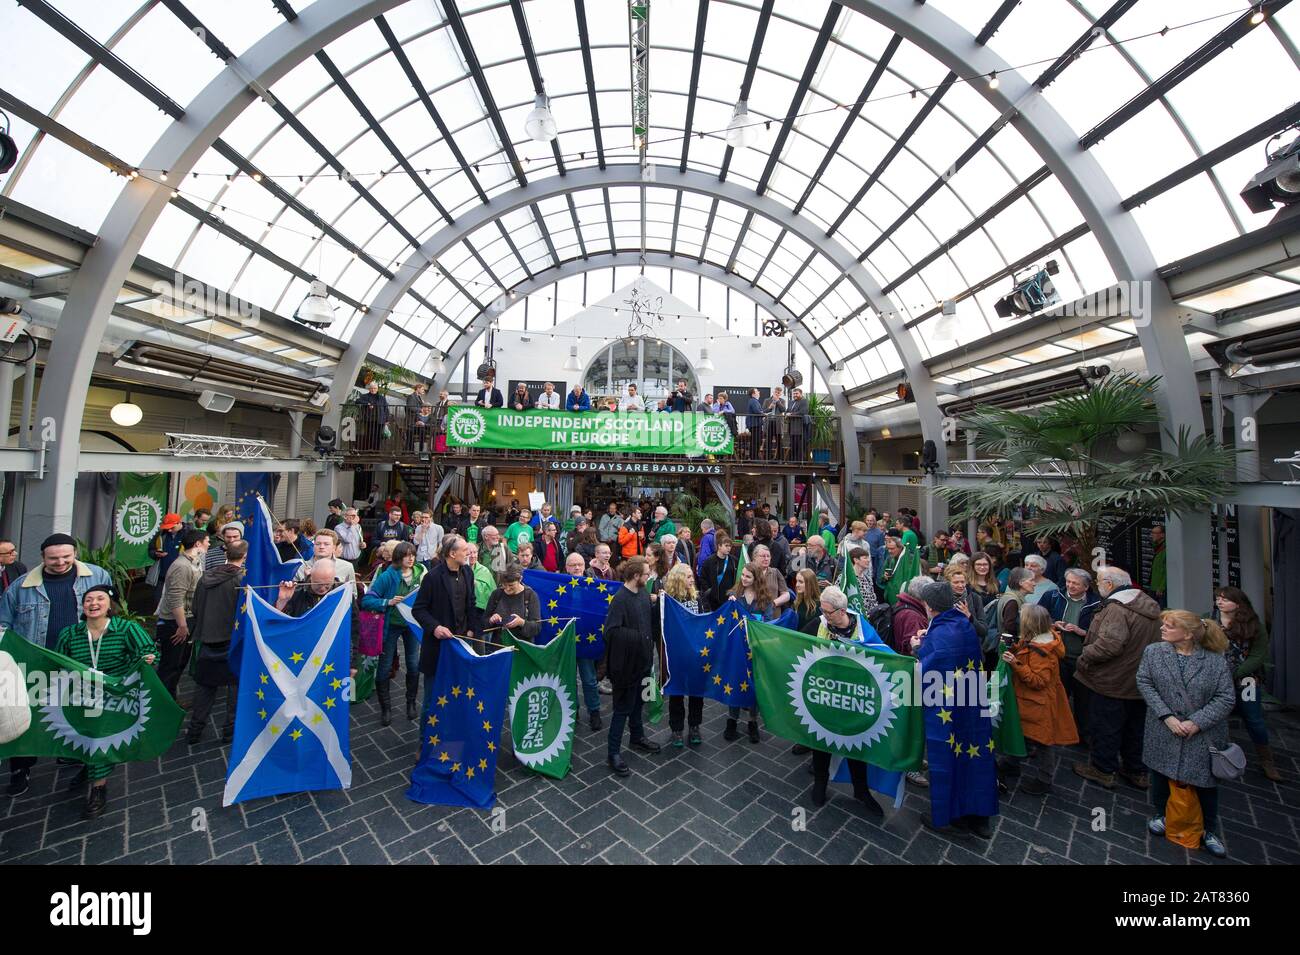 Glasgow, UK. 31st Jan, 2020. Pictured: Scenes from the Campaign Launch. On the day the UK leaves the European Union, the Scottish Greens stage a major rally to launch a new Green Yes campaign for Scotland to re-join the EU as an independent nation. Scottish Greens co-leader Patrick Harvie is joined by Ska Keller MEP, president of the Green group in the European Parliament, who will give a speech. Credit: Colin Fisher/Alamy Live News Stock Photo